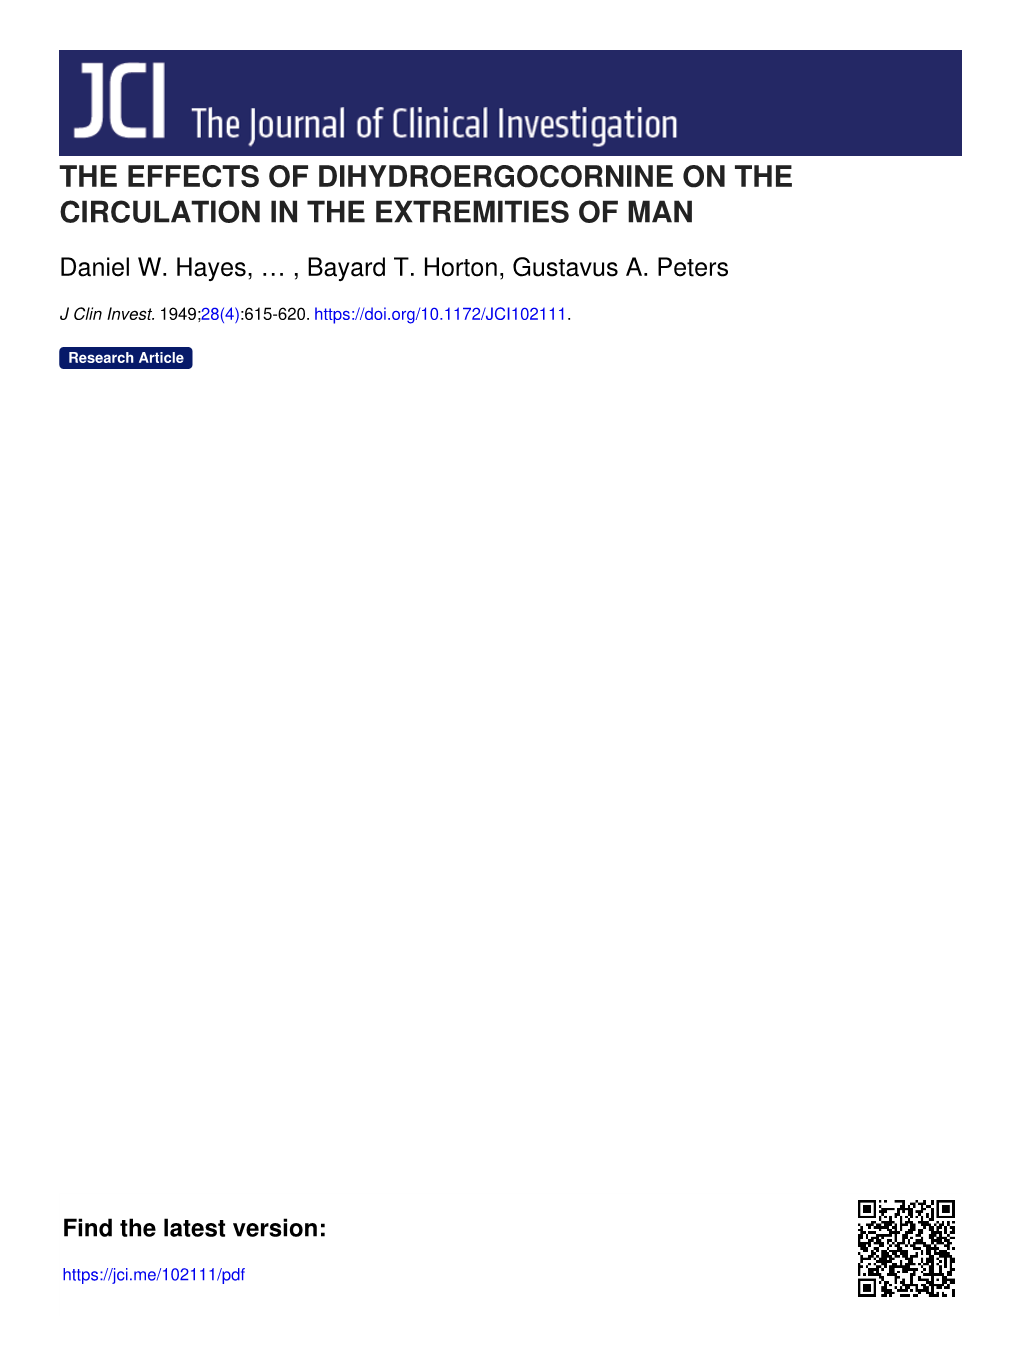 The Effects of Dihydroergocornine on the Circulation in the Extremities of Man